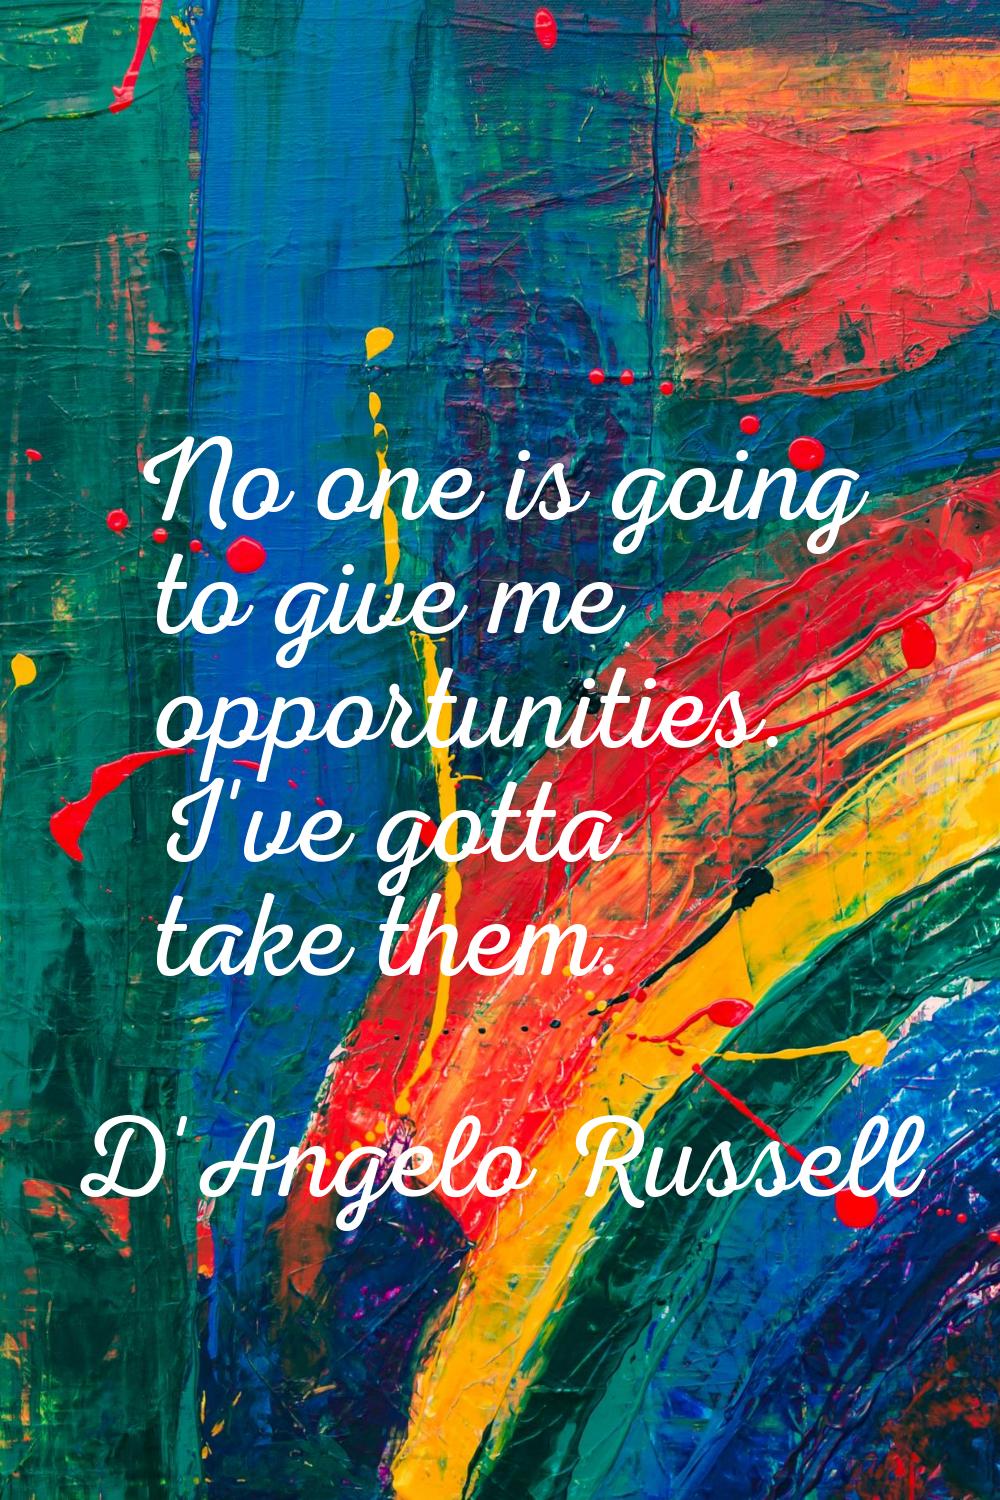 No one is going to give me opportunities. I've gotta take them.